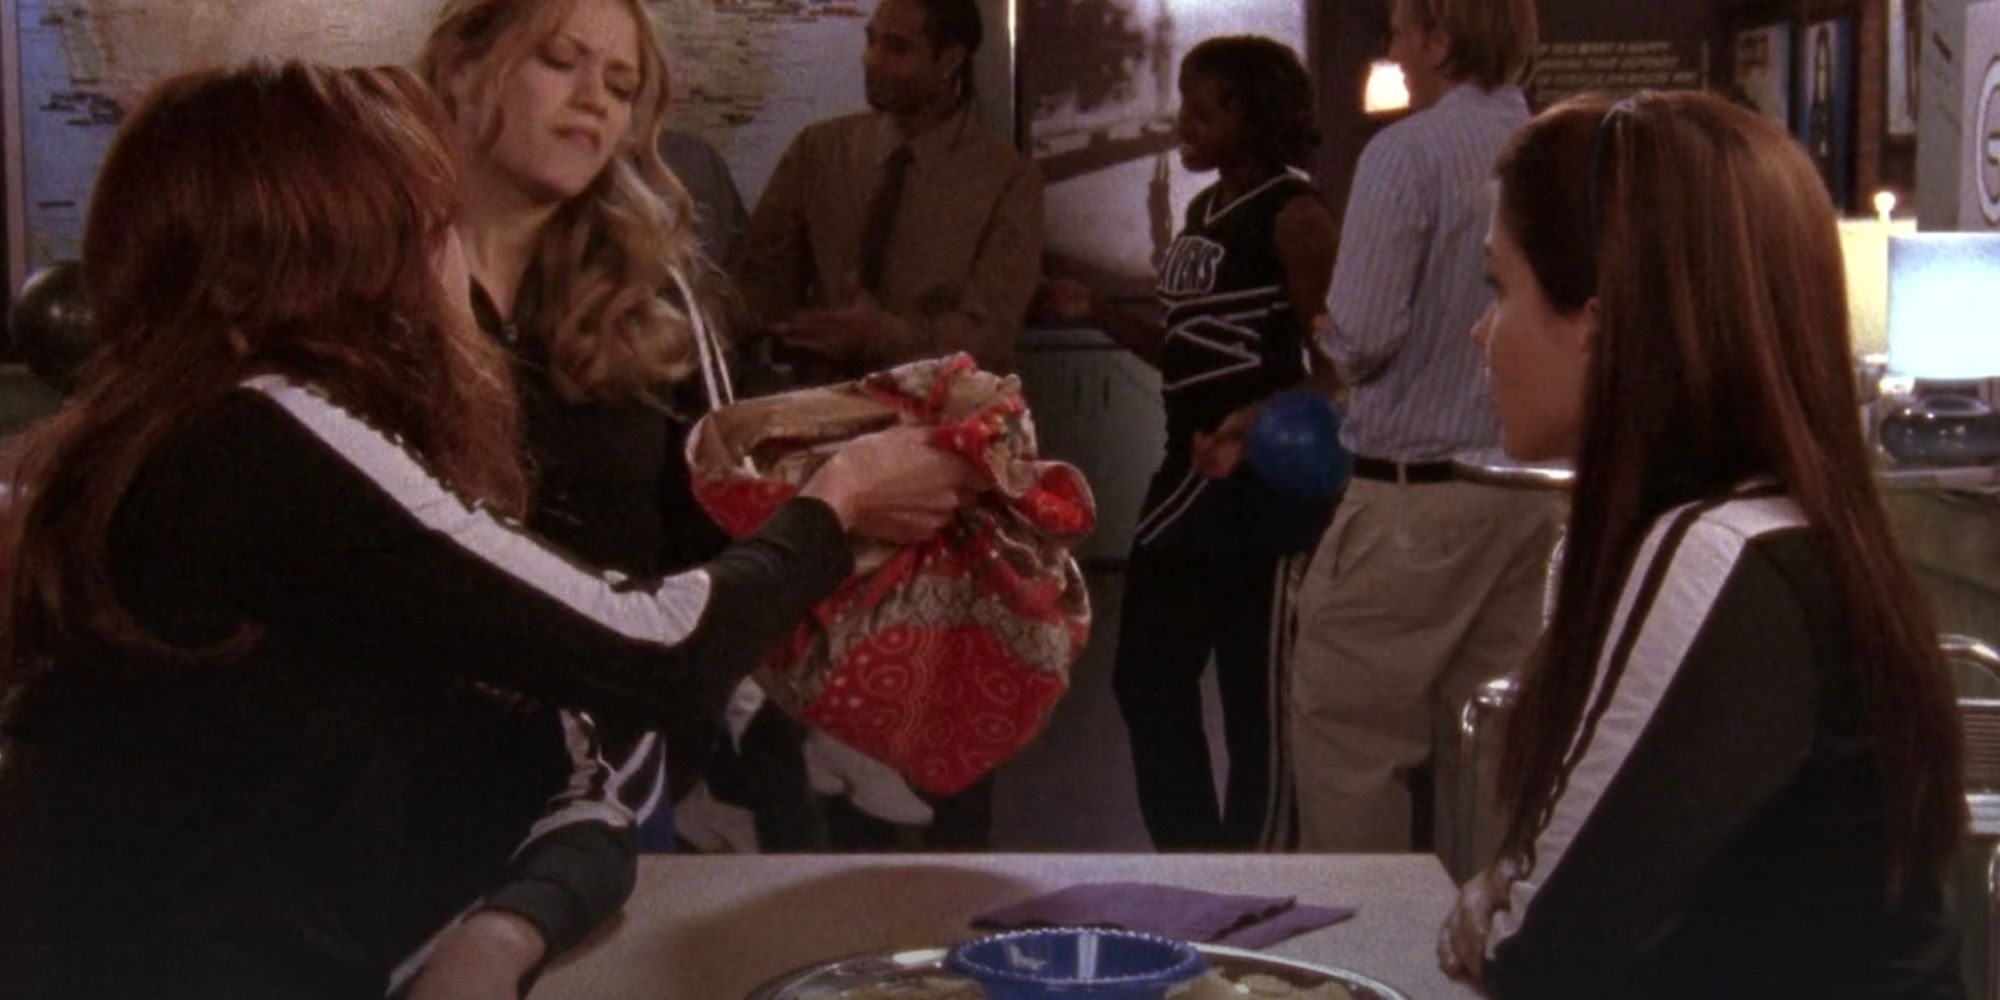 Rachel gives Haley her purse while Brooke watches in One Tree Hill